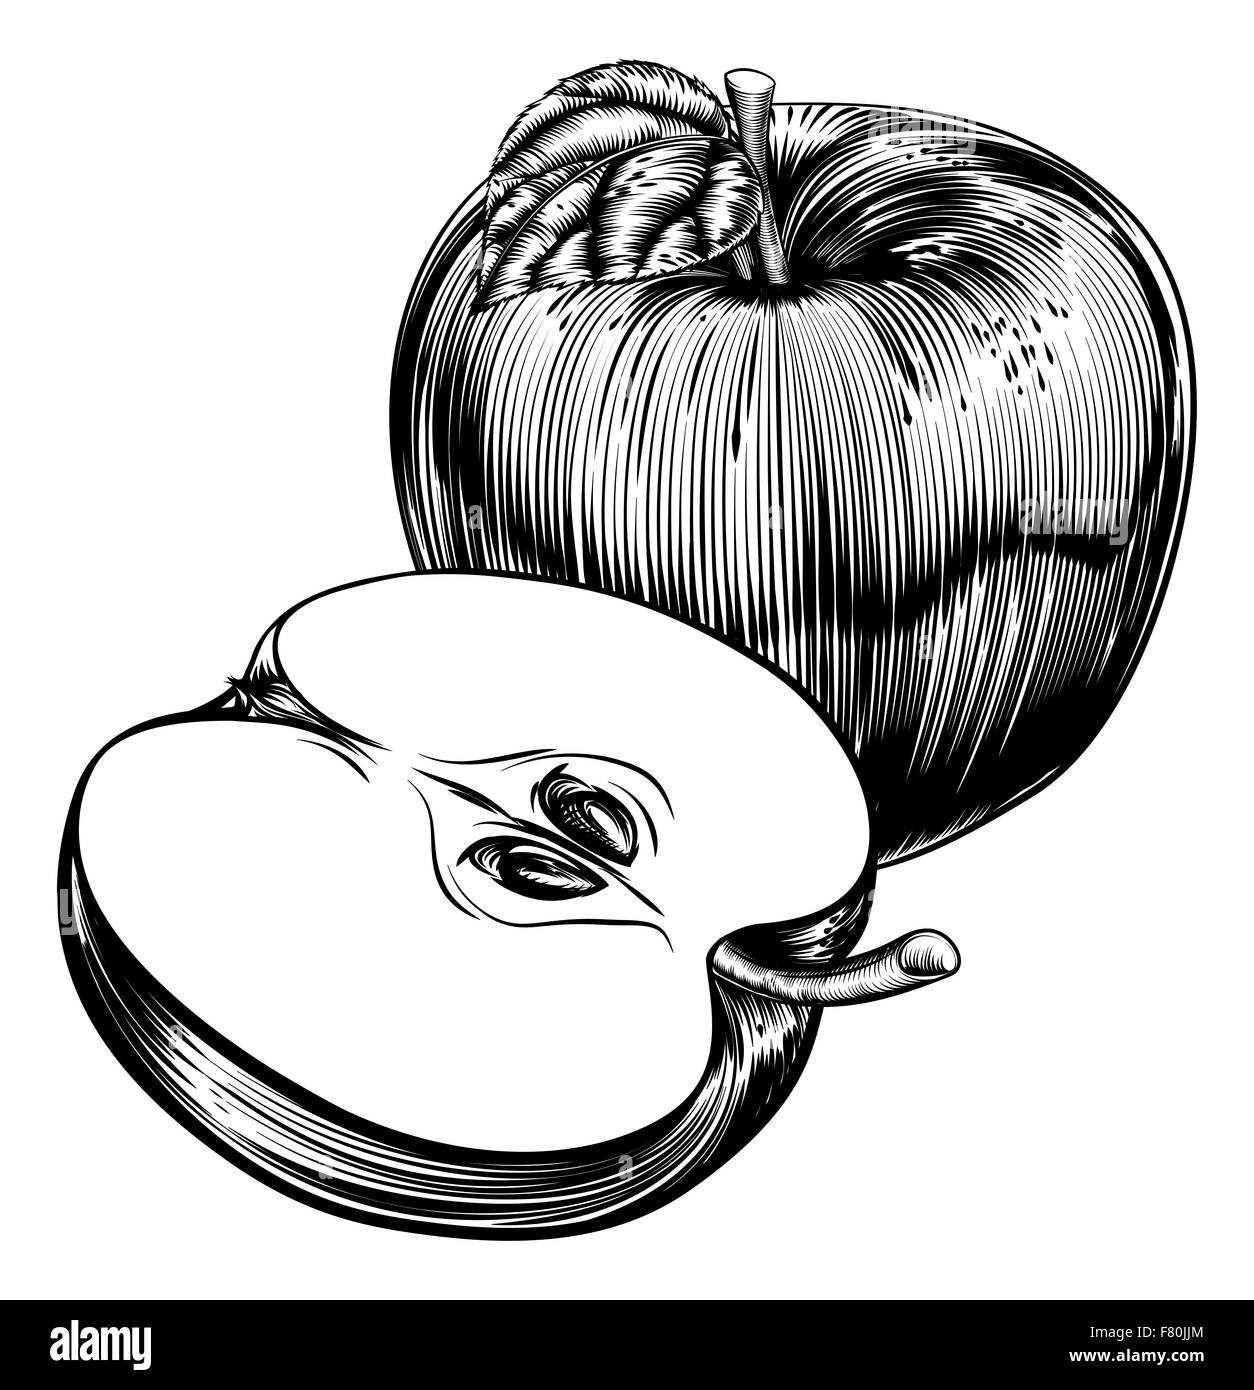 An original illustration of a whole apple and sliced apple fruit in a vintage woodcut or woodblock style Stock Photo